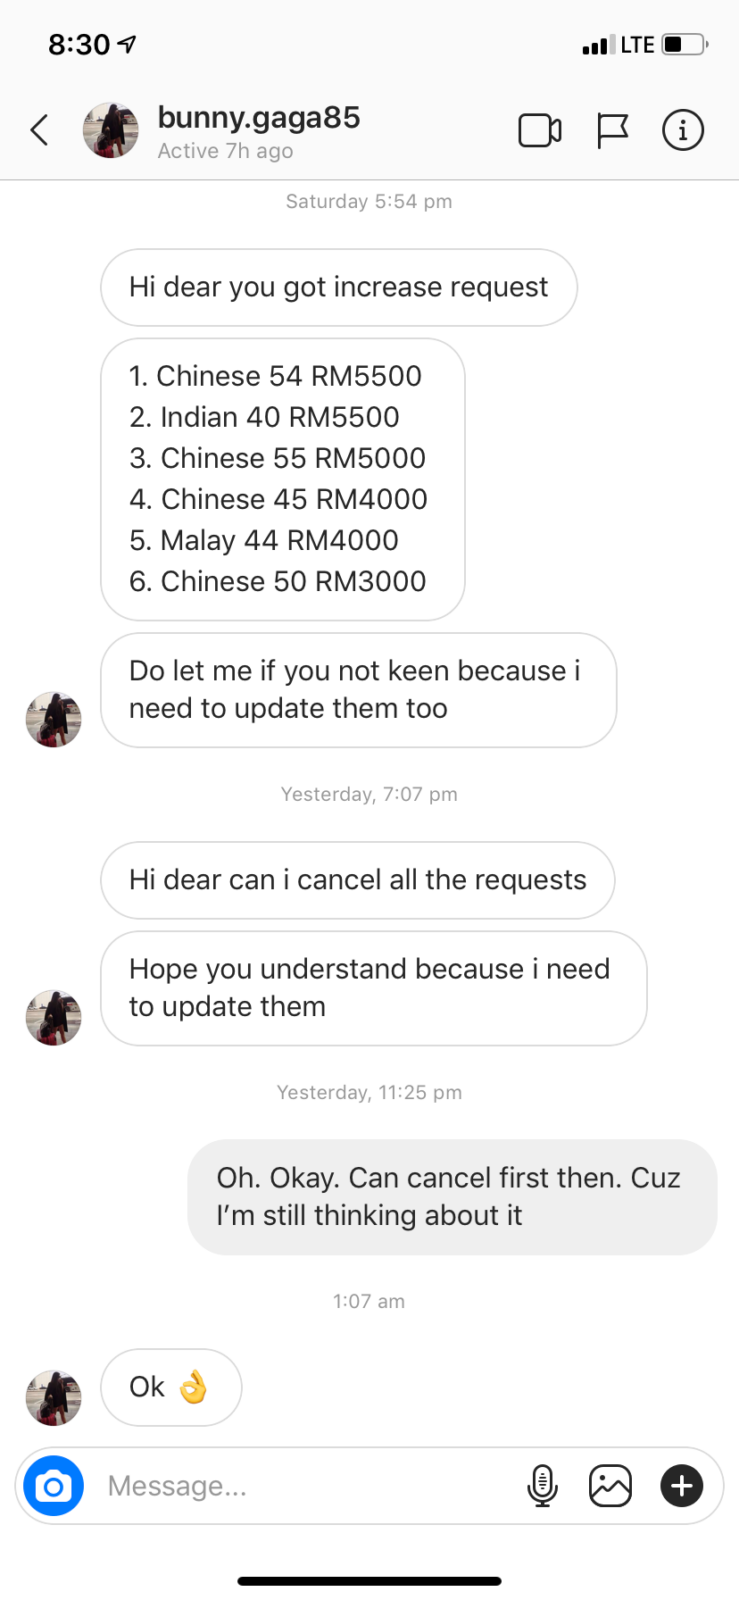 A Sugar Daddy Agent Messaged Me on Instagram and Said I Could Earn RM40,000 A Month - WORLD OF BUZZ